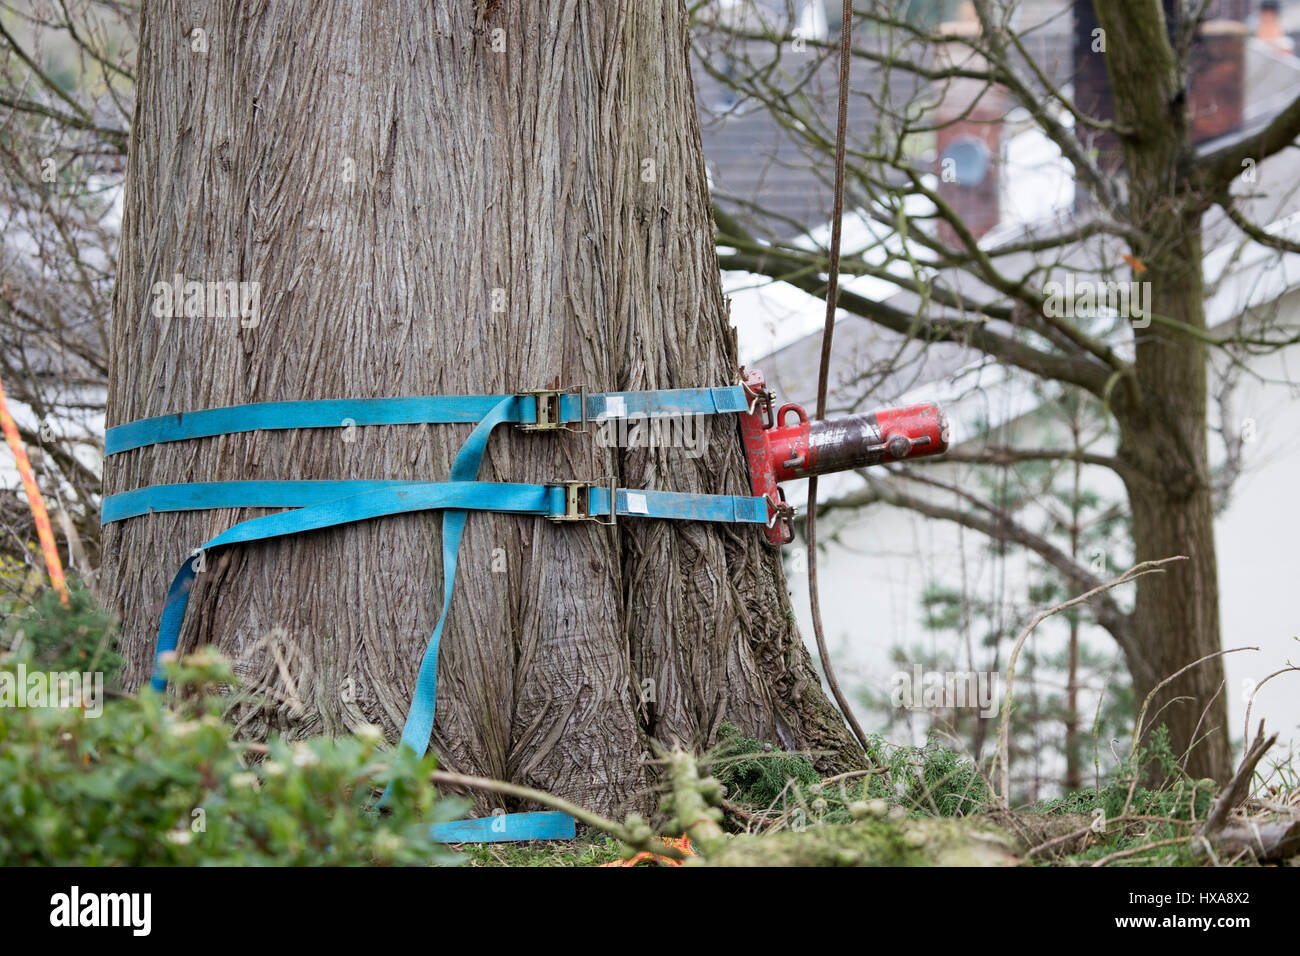 A tree surgeons lowering device attached to a large tree ready for lowering large upper branches down from the tree, attached with harnesses Stock Photo